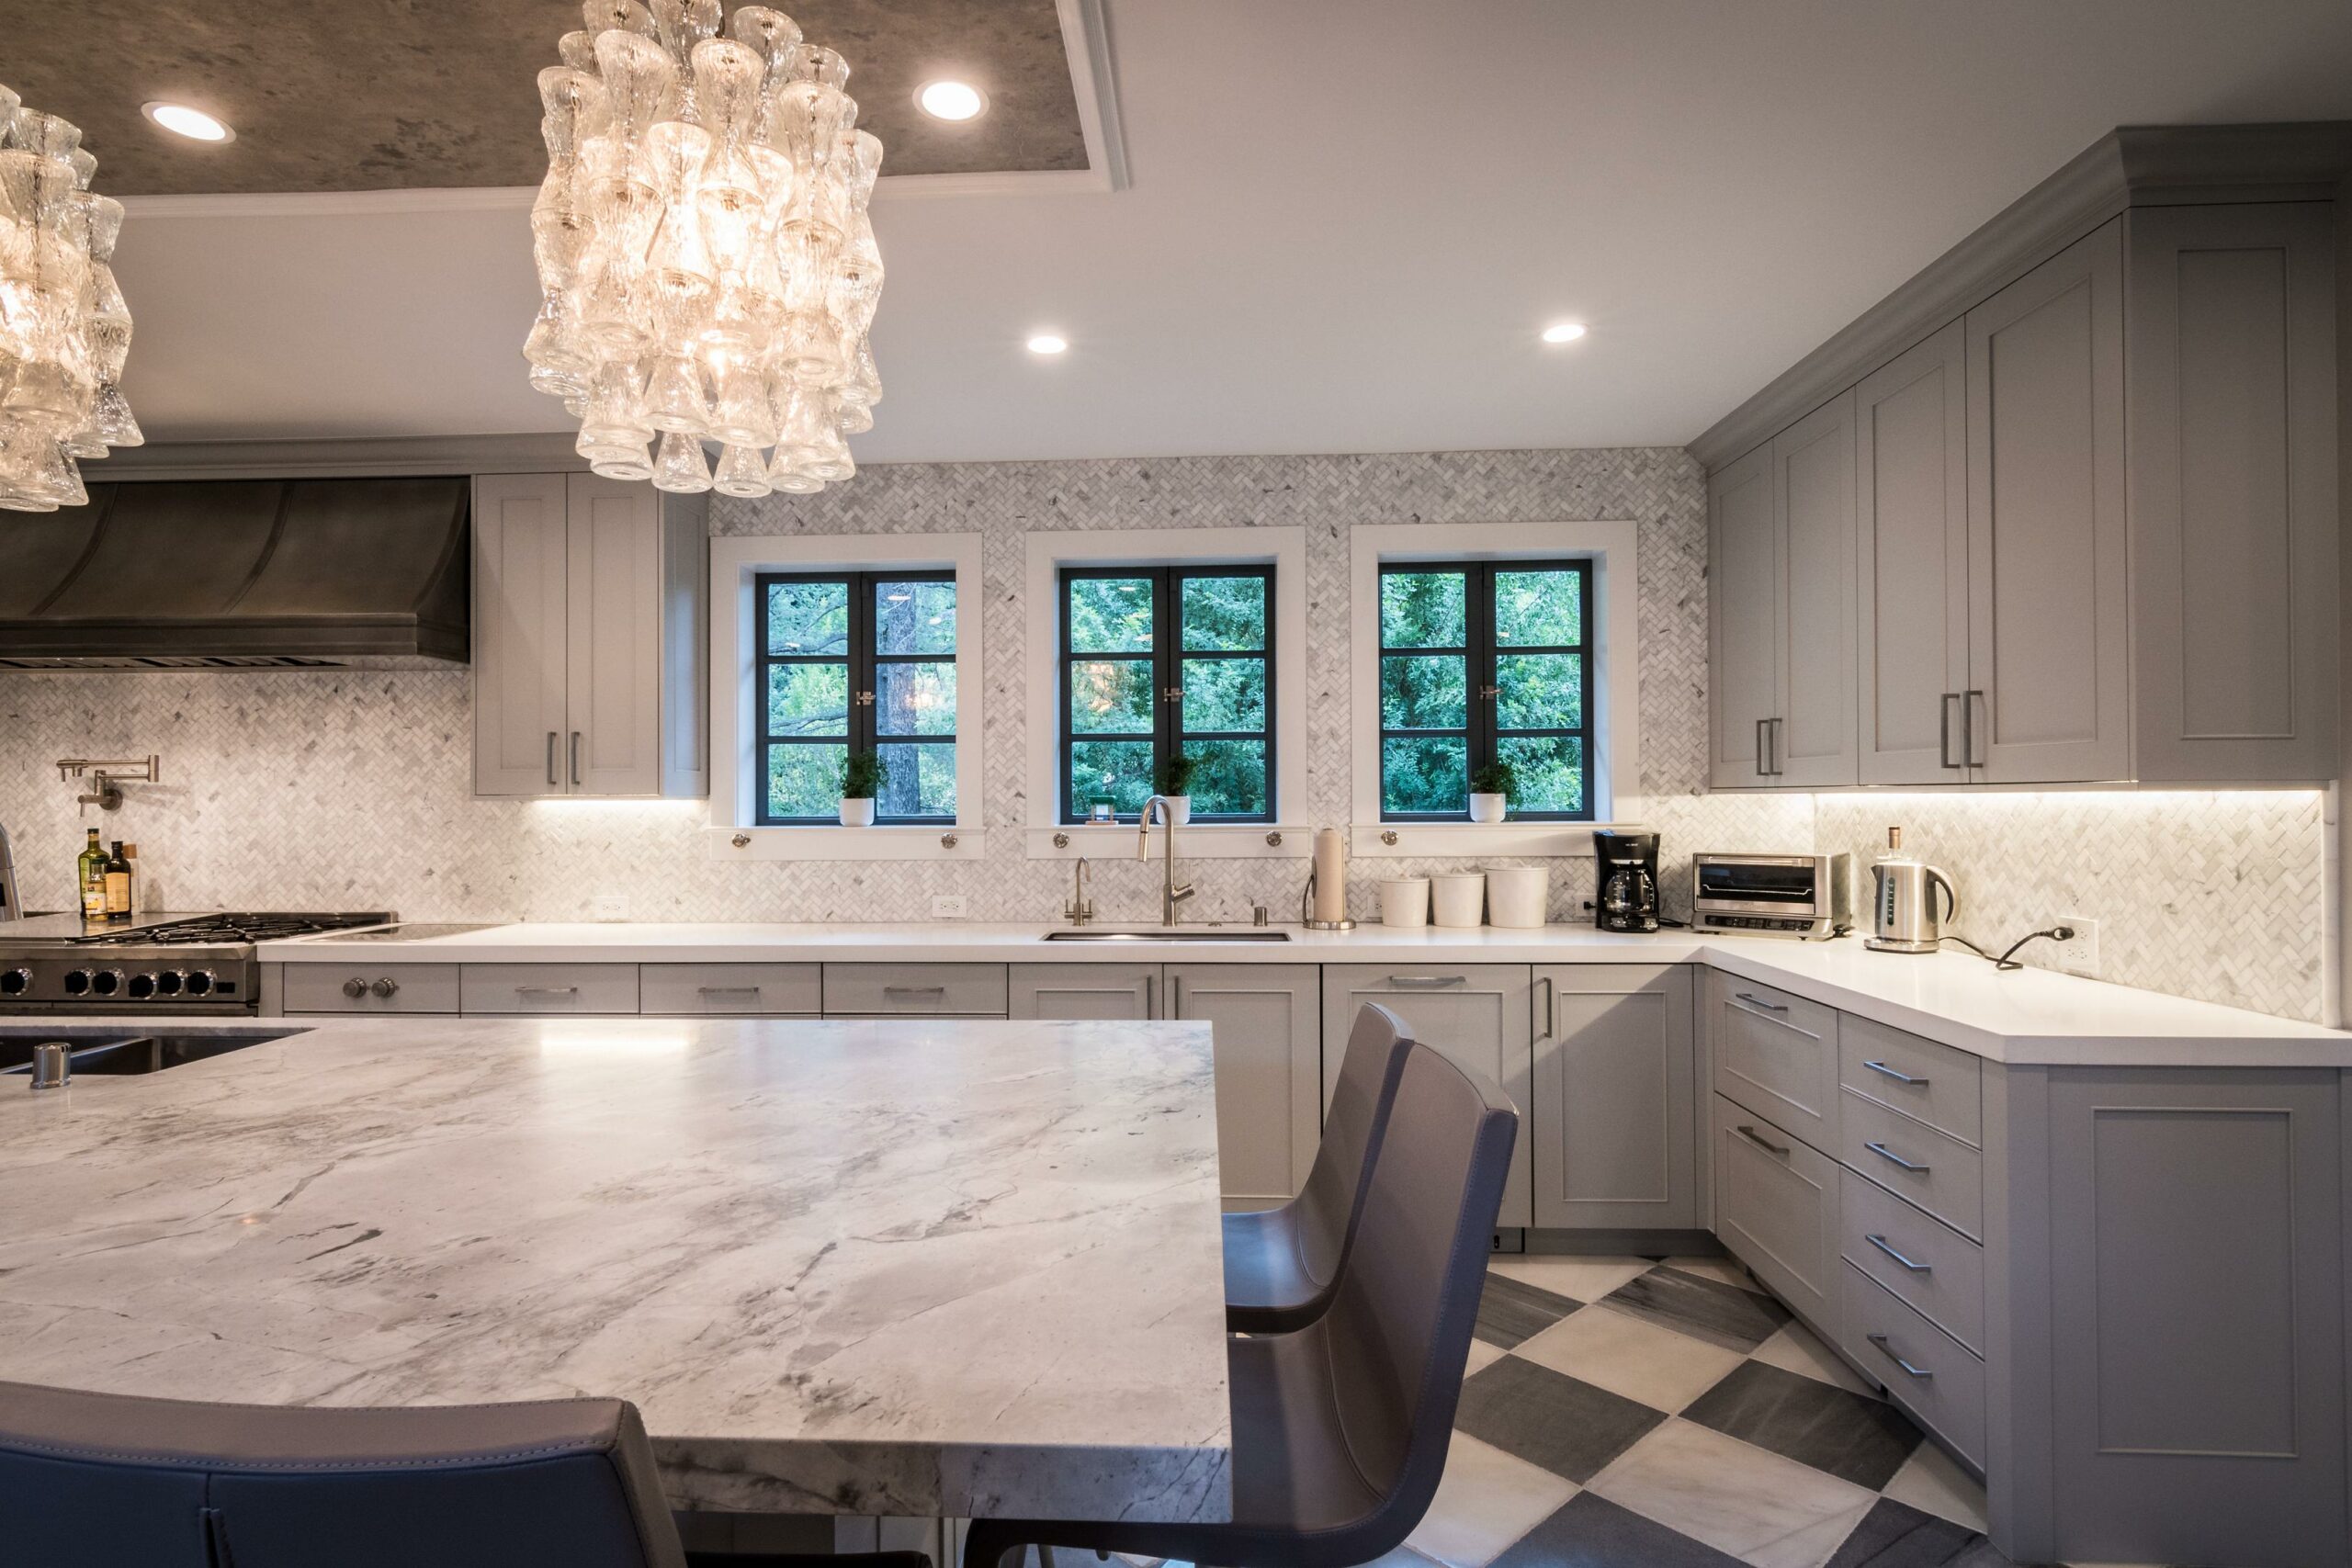 Elegant modern kitchen with marble countertops and chandelier.